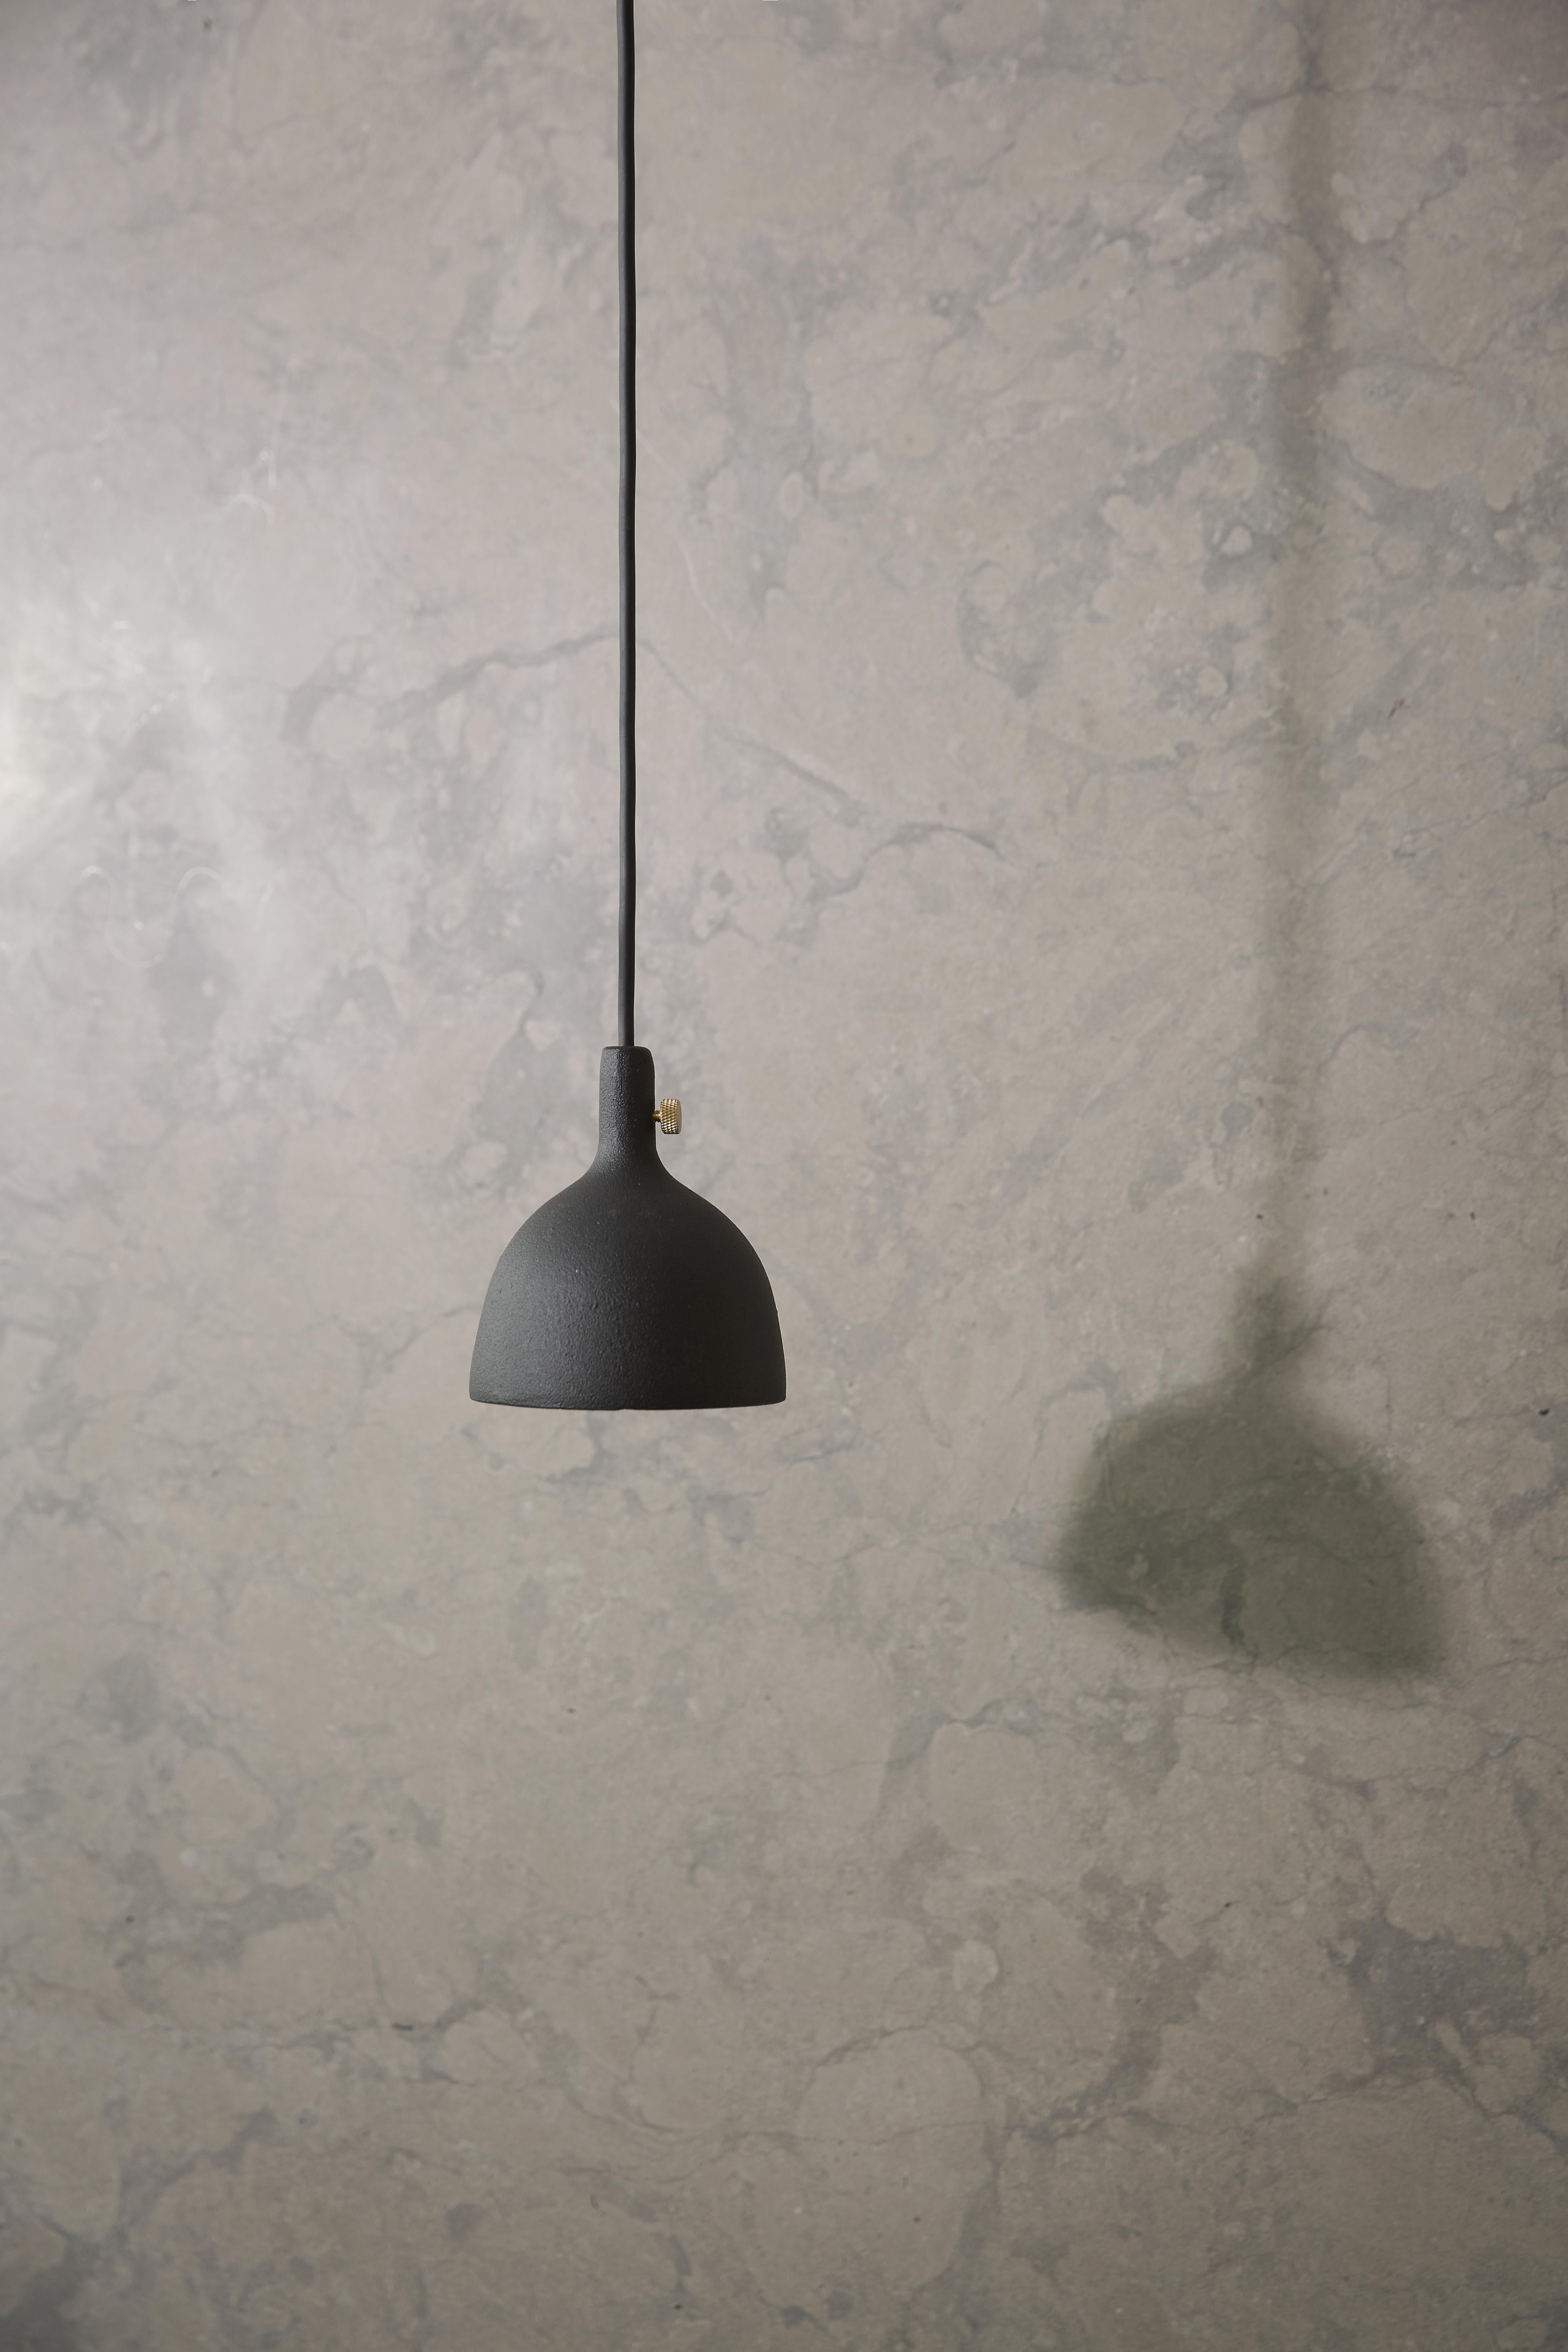 Cast pendant takes inspiration from the traditional plumb weight – a weight hanging from a line used by masons and carpenters since Ancient Egypt to establish a true vertical. An honest light, cast pendant embodies our philosophy of soft minimalism.